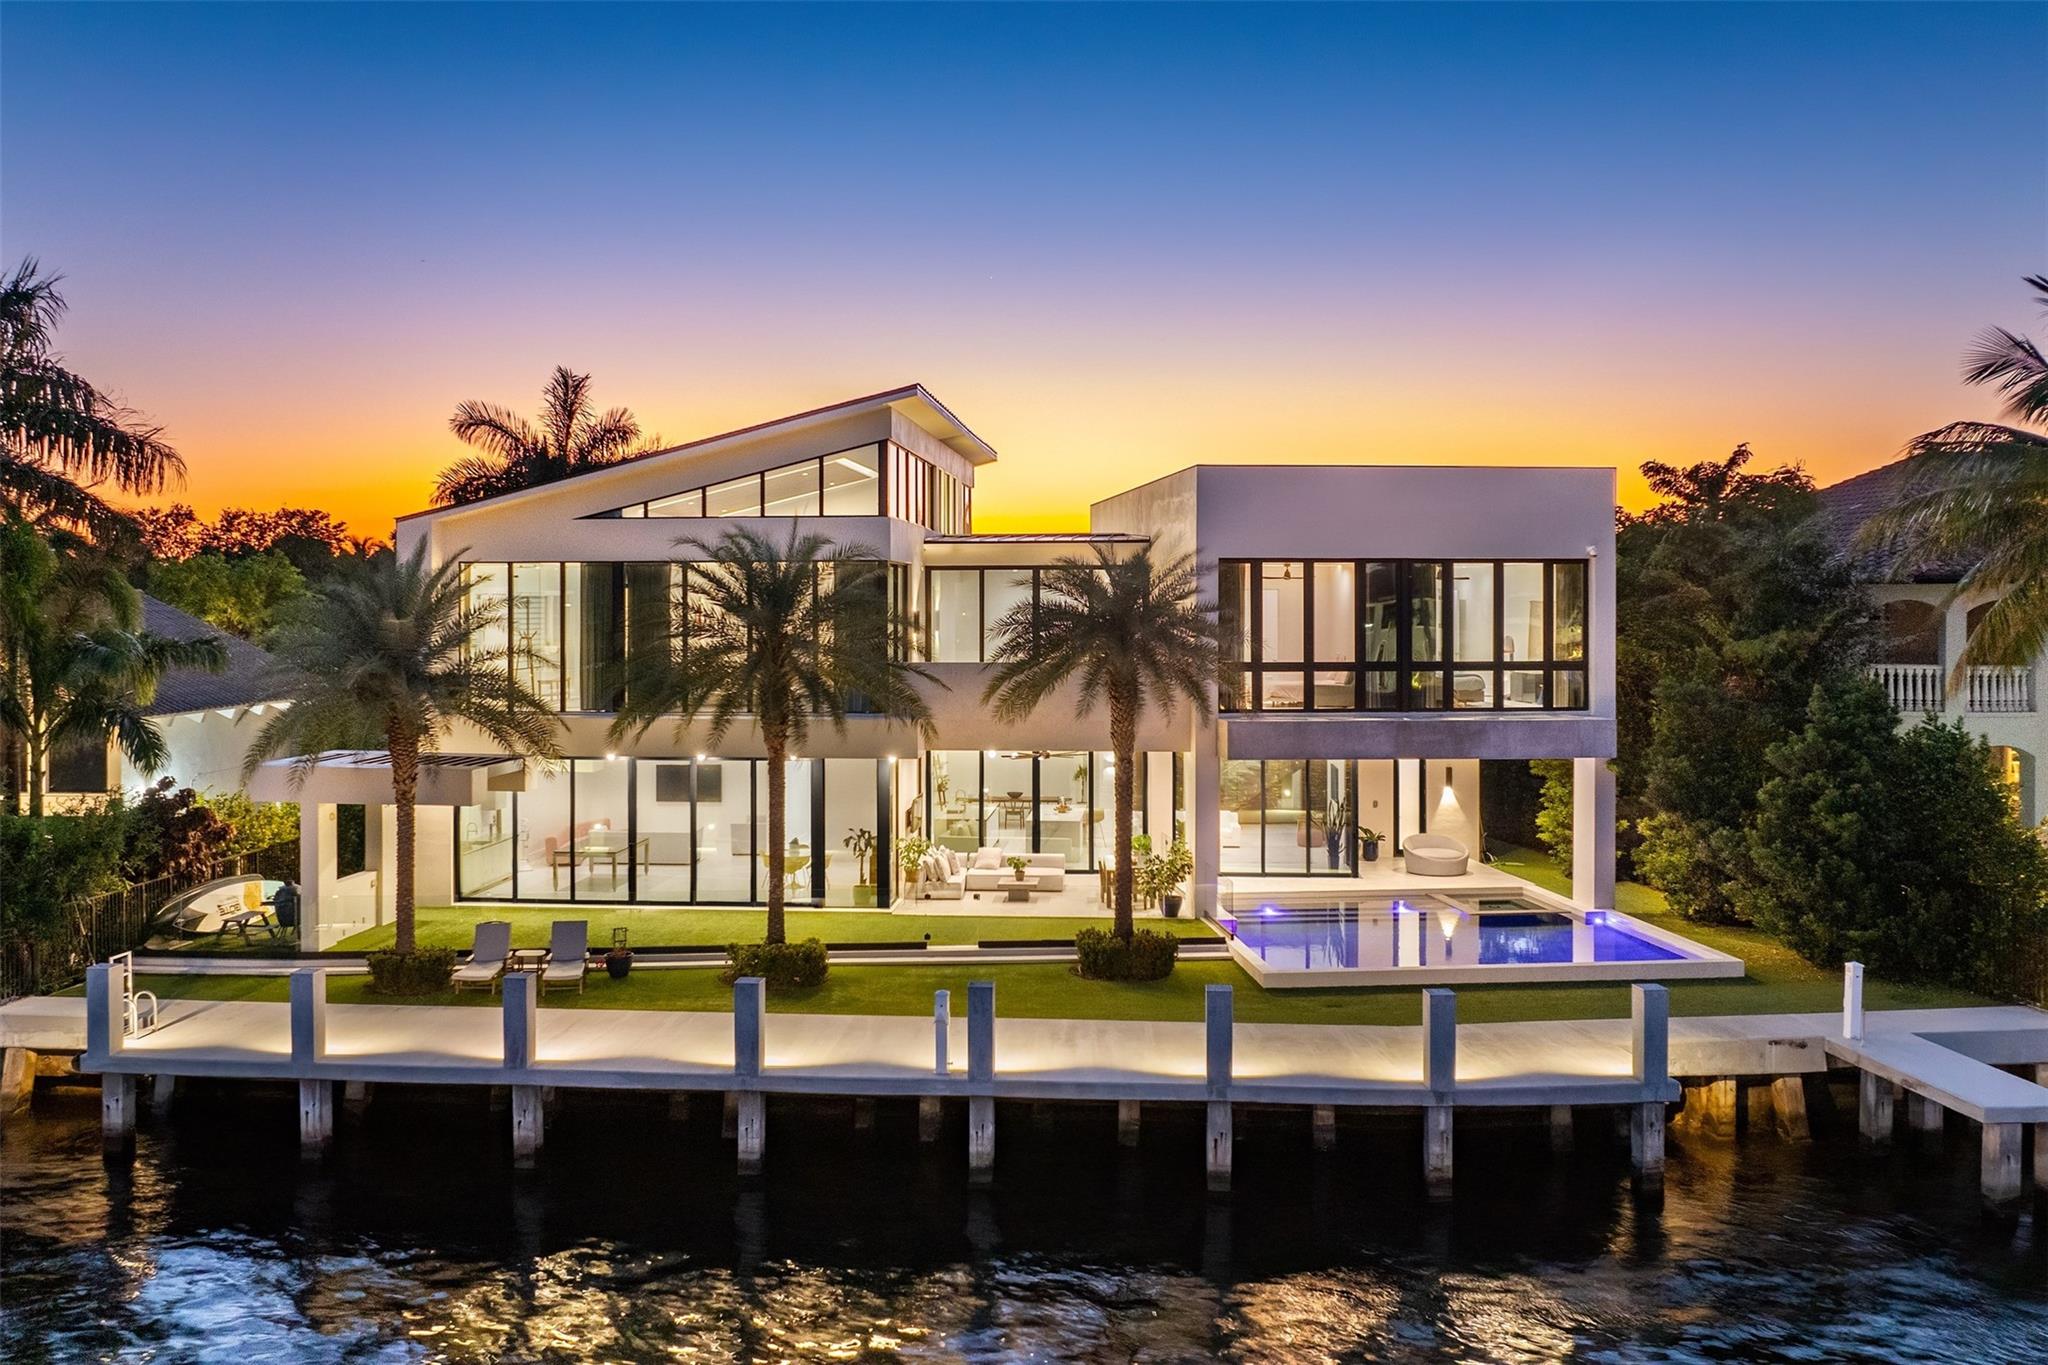 This sleek, contemporary, fully gated masterpiece by Affiniti Architects offers the ultimate lifestyle in luxury waterfront living with its high-end finishes & smart home technology. Open concept floor plan allows for seamless indoor/outdoor living, perfect for entertaining guests or enjoying your 105' of direct Intracoastal views. Find micro cement and wood flooring throughout, chef's kitchen w/ top-of-the-line appliances, custom cabinetry & double islands, wet bar & elevator. The primary suite is a true oasis with high ceilings, double walk-in closets, and spa-like bathroom complete w/ steam shower and soaking tub. Outside, the expansive outdoor living area features a saltwater pool, spa & brand new concrete dock perfect for enjoying waterfront activities or watching the boats pass by.